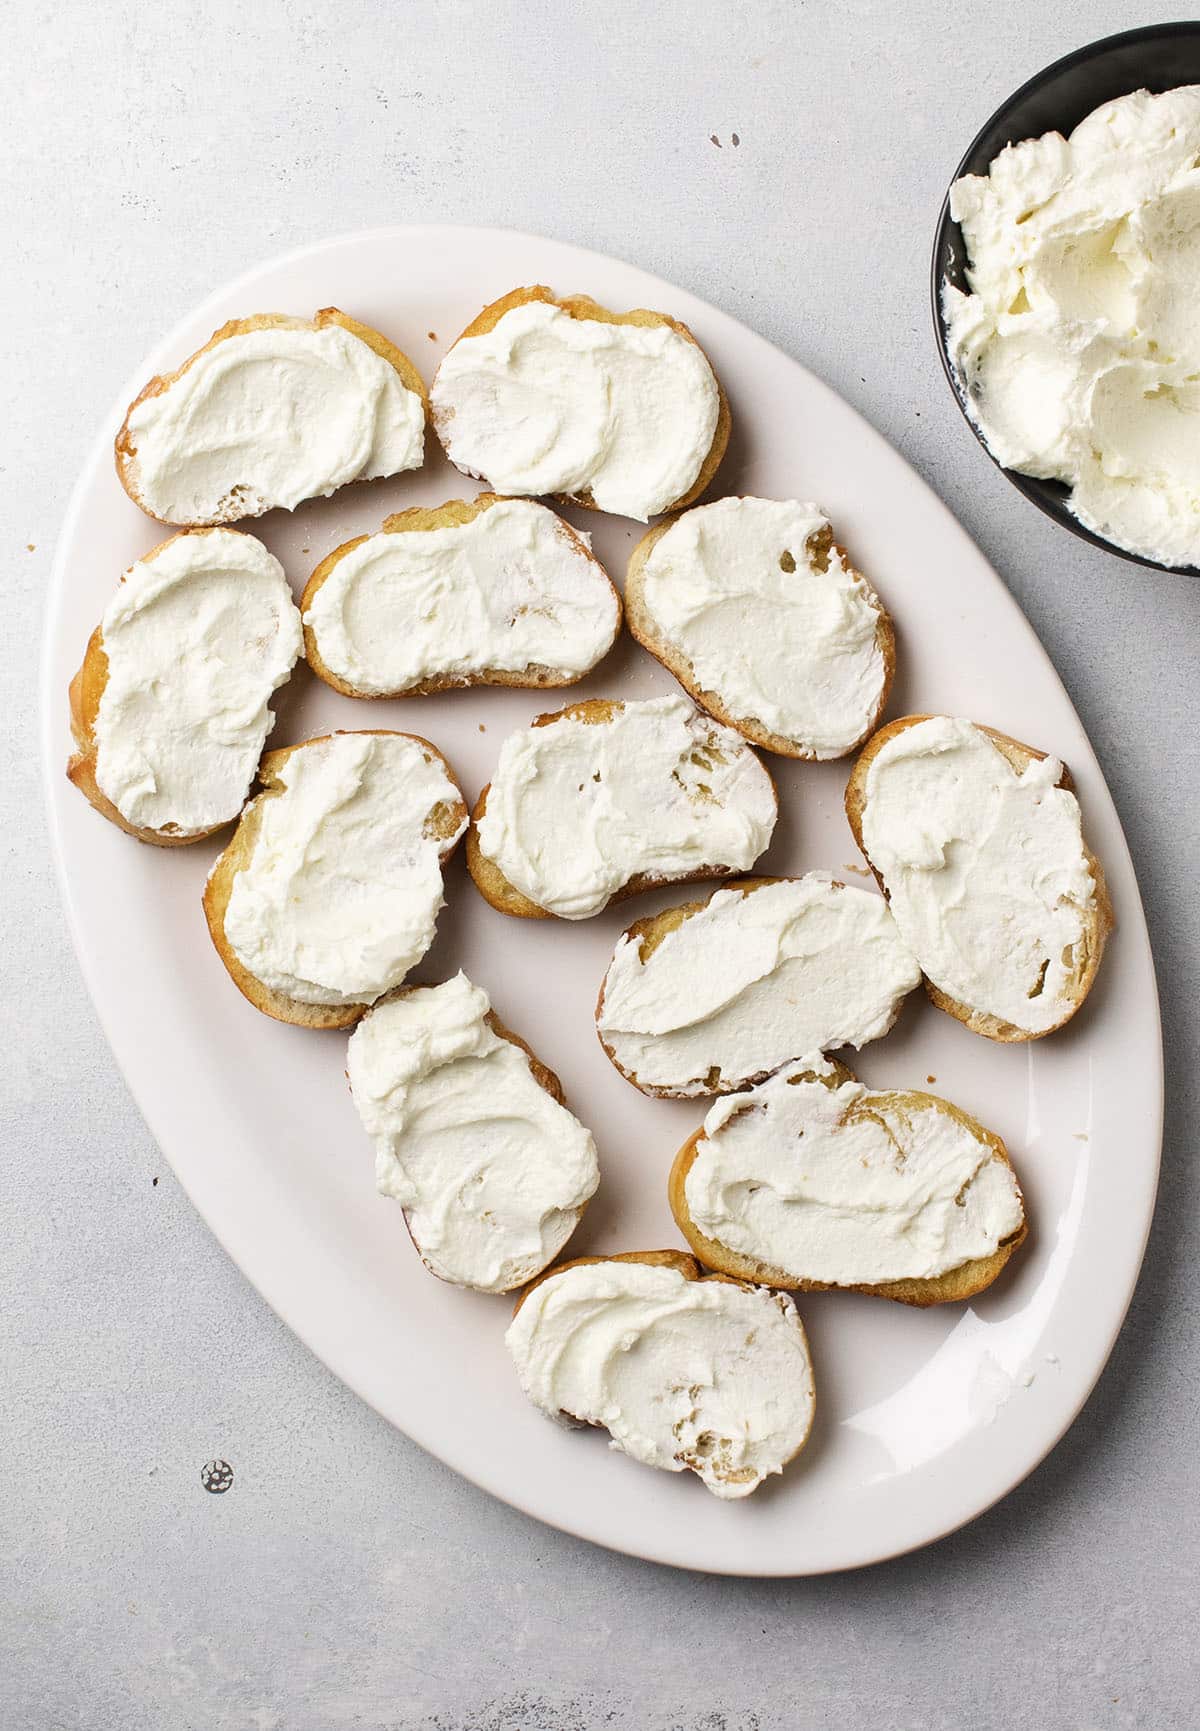 Crostini topped with whipped goat cheese on a white serving platter.